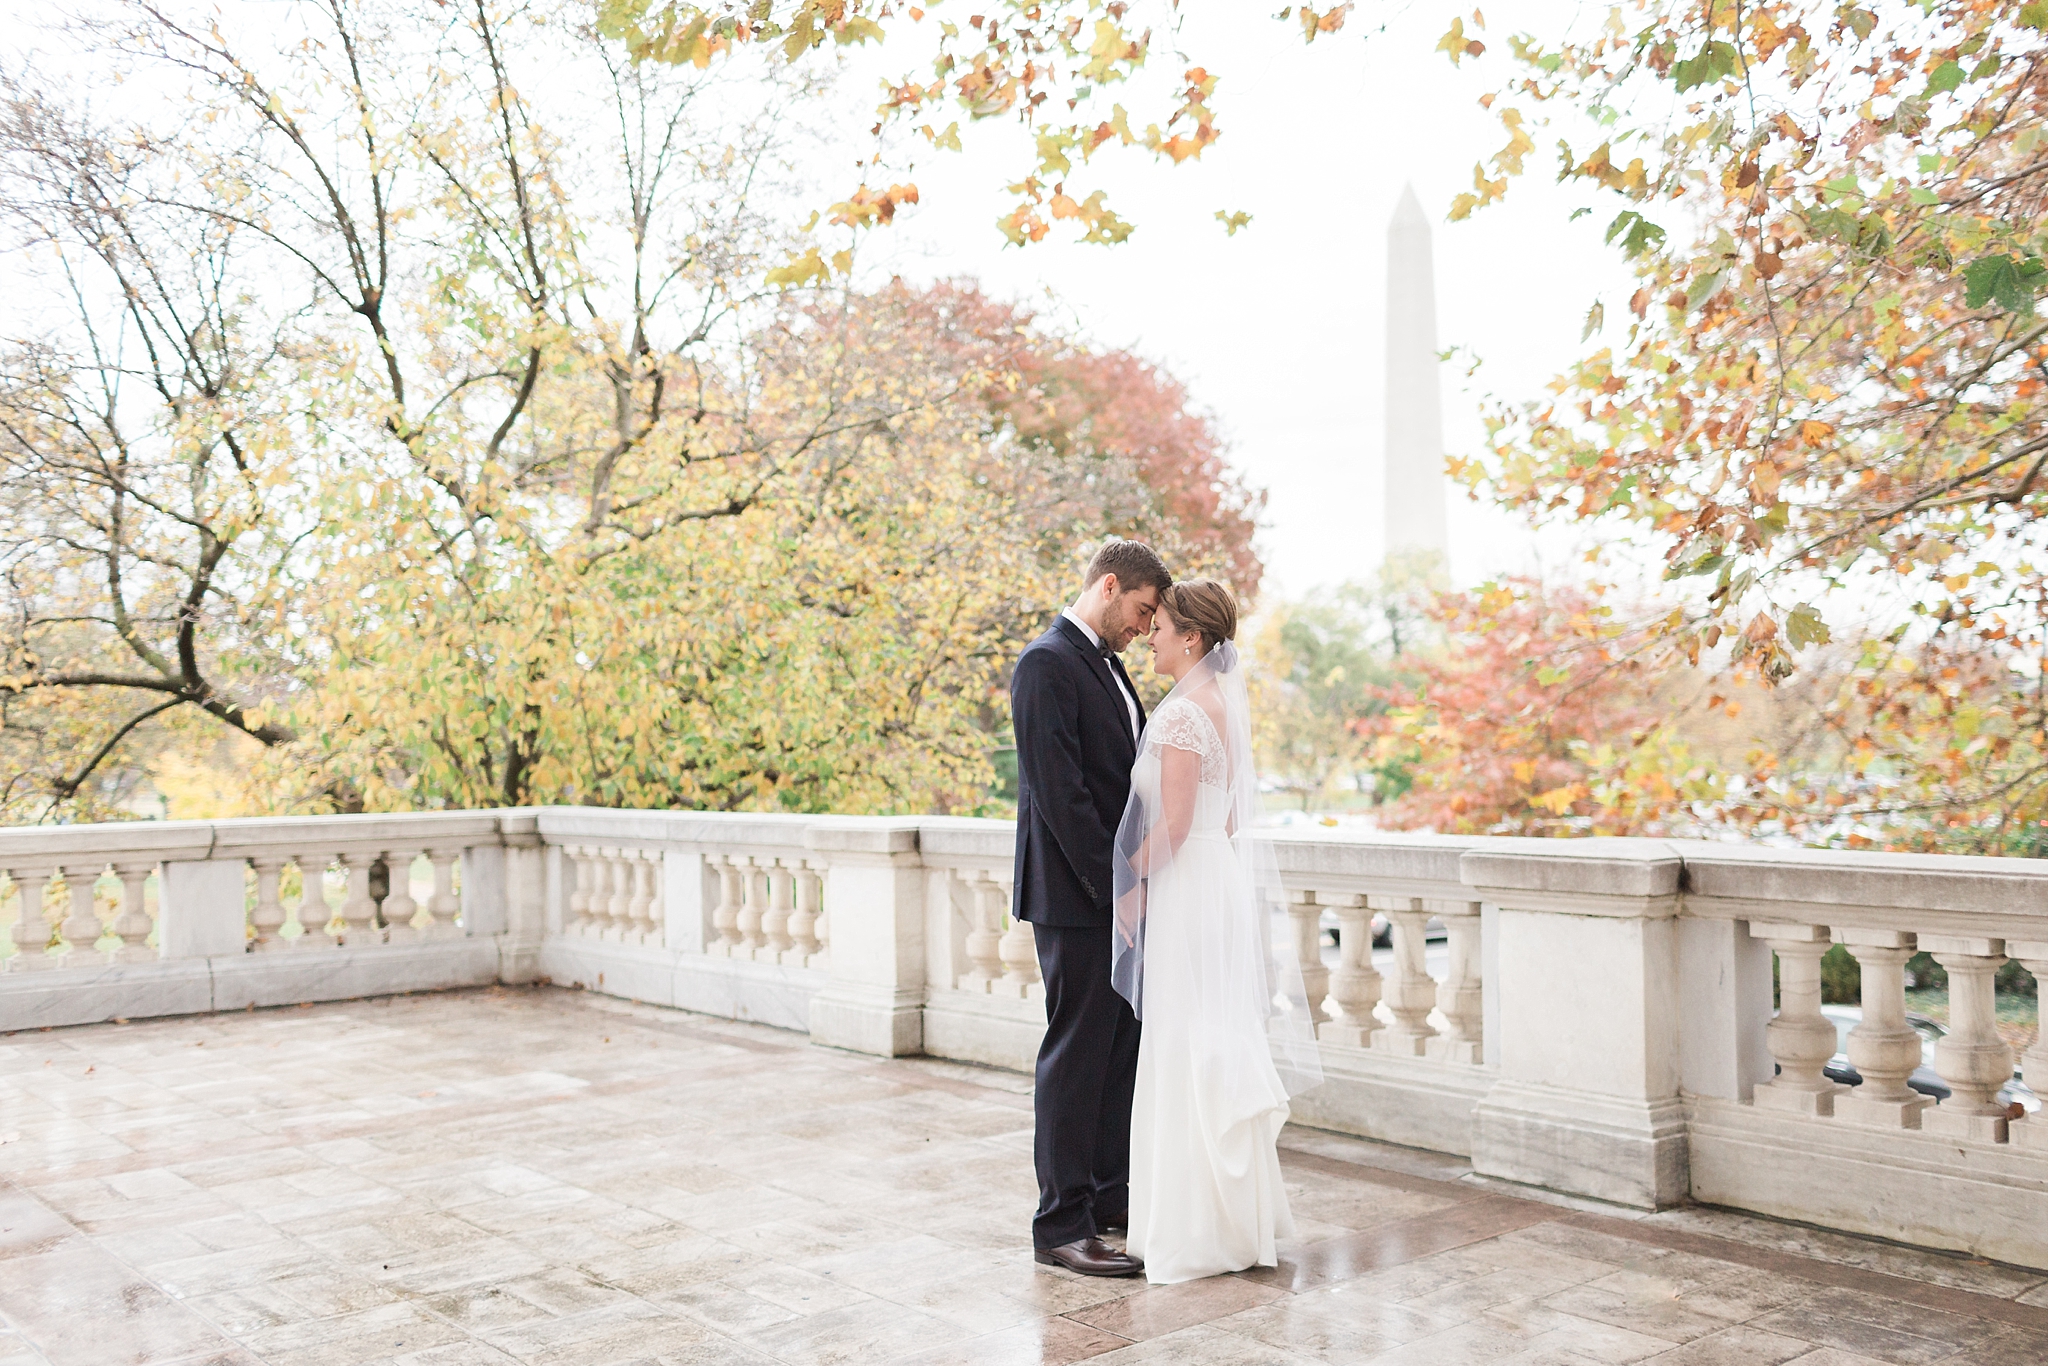 Home to Our Nation's Capital, DC is host to many weekend events, festivals, and parades. This wedding photographer is sharing a few you may want to avoid for your big day.  